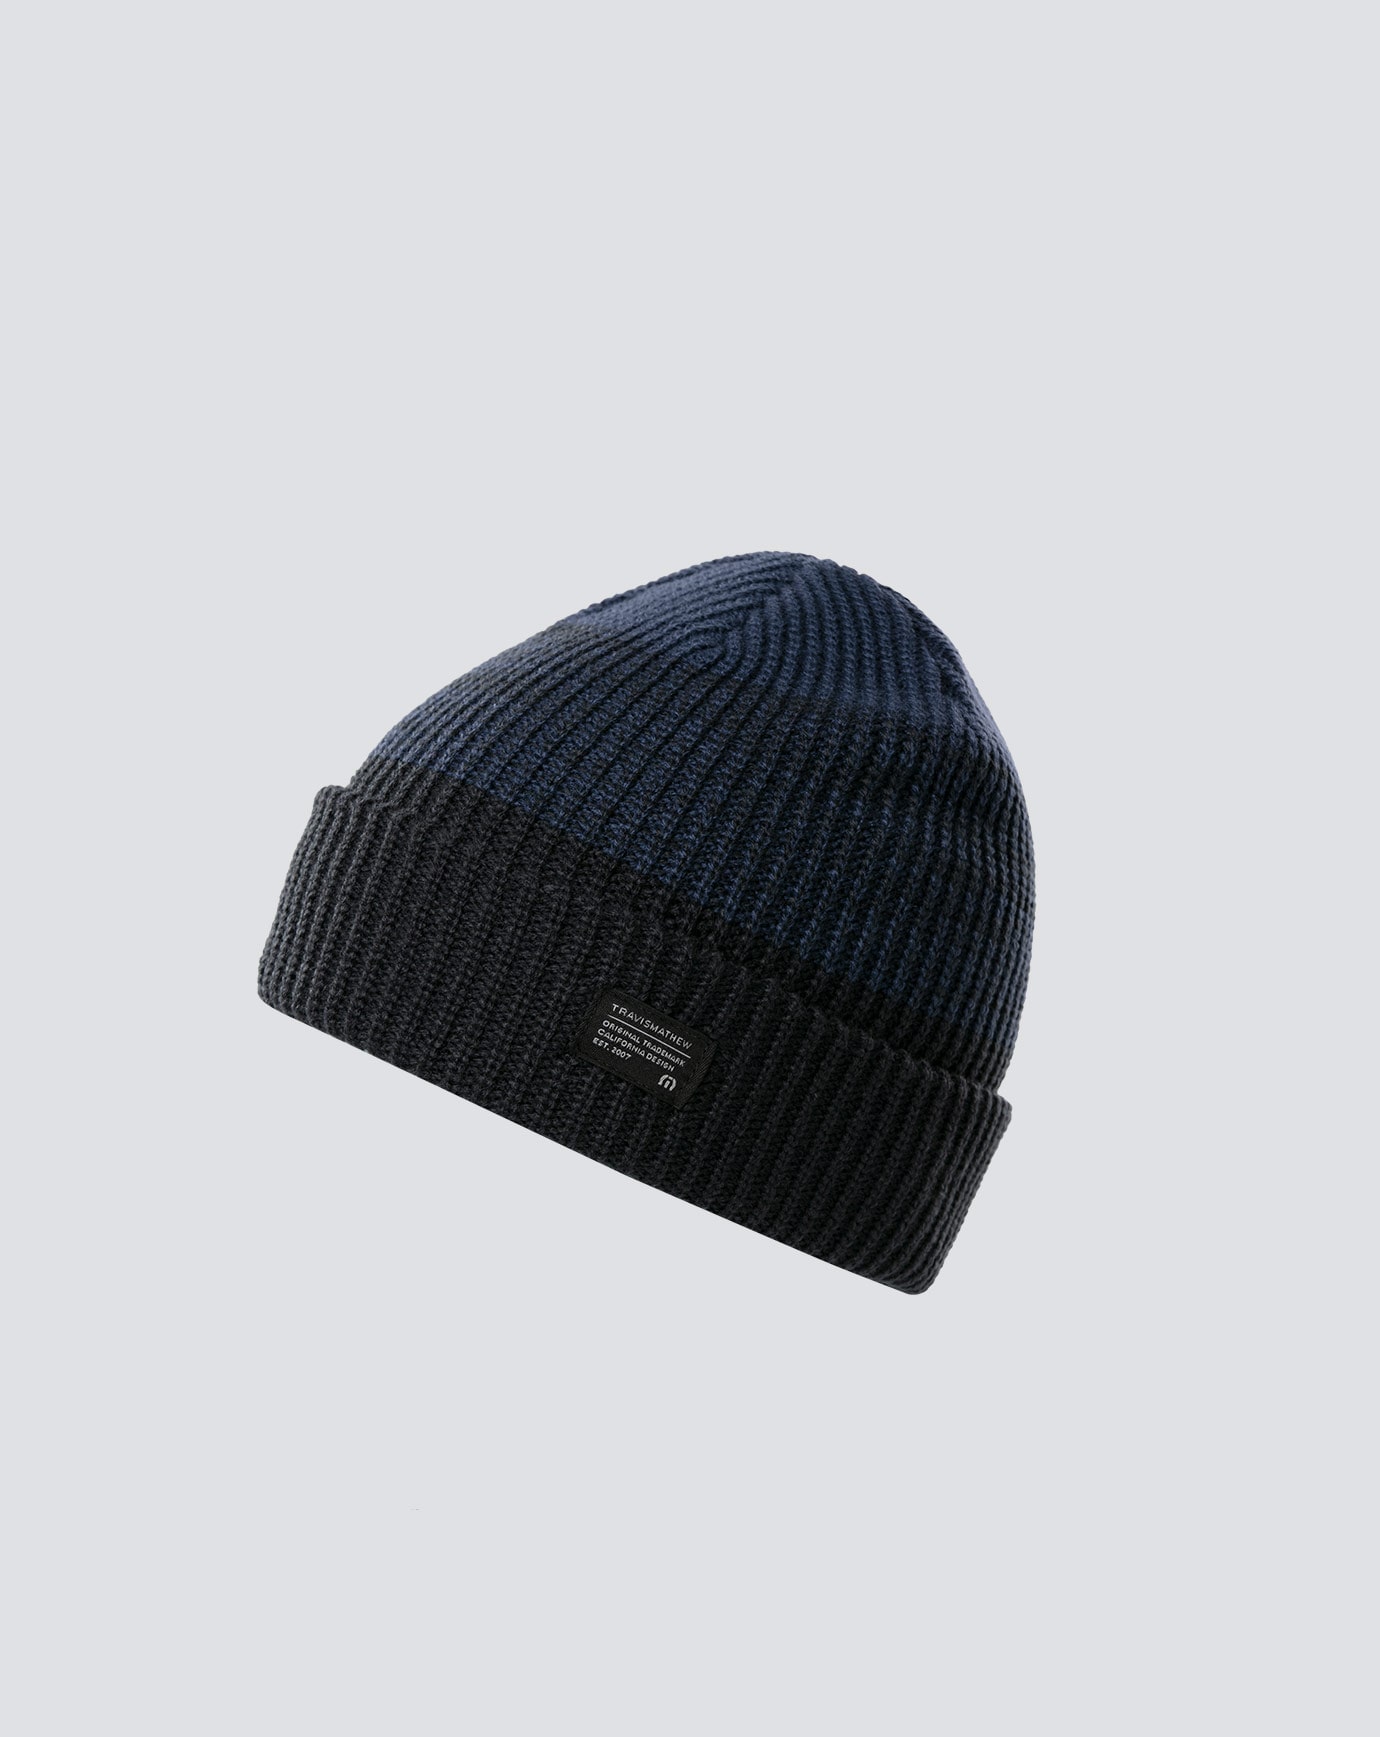 PREVAILING WINDS BEANIE Image Thumbnail 2